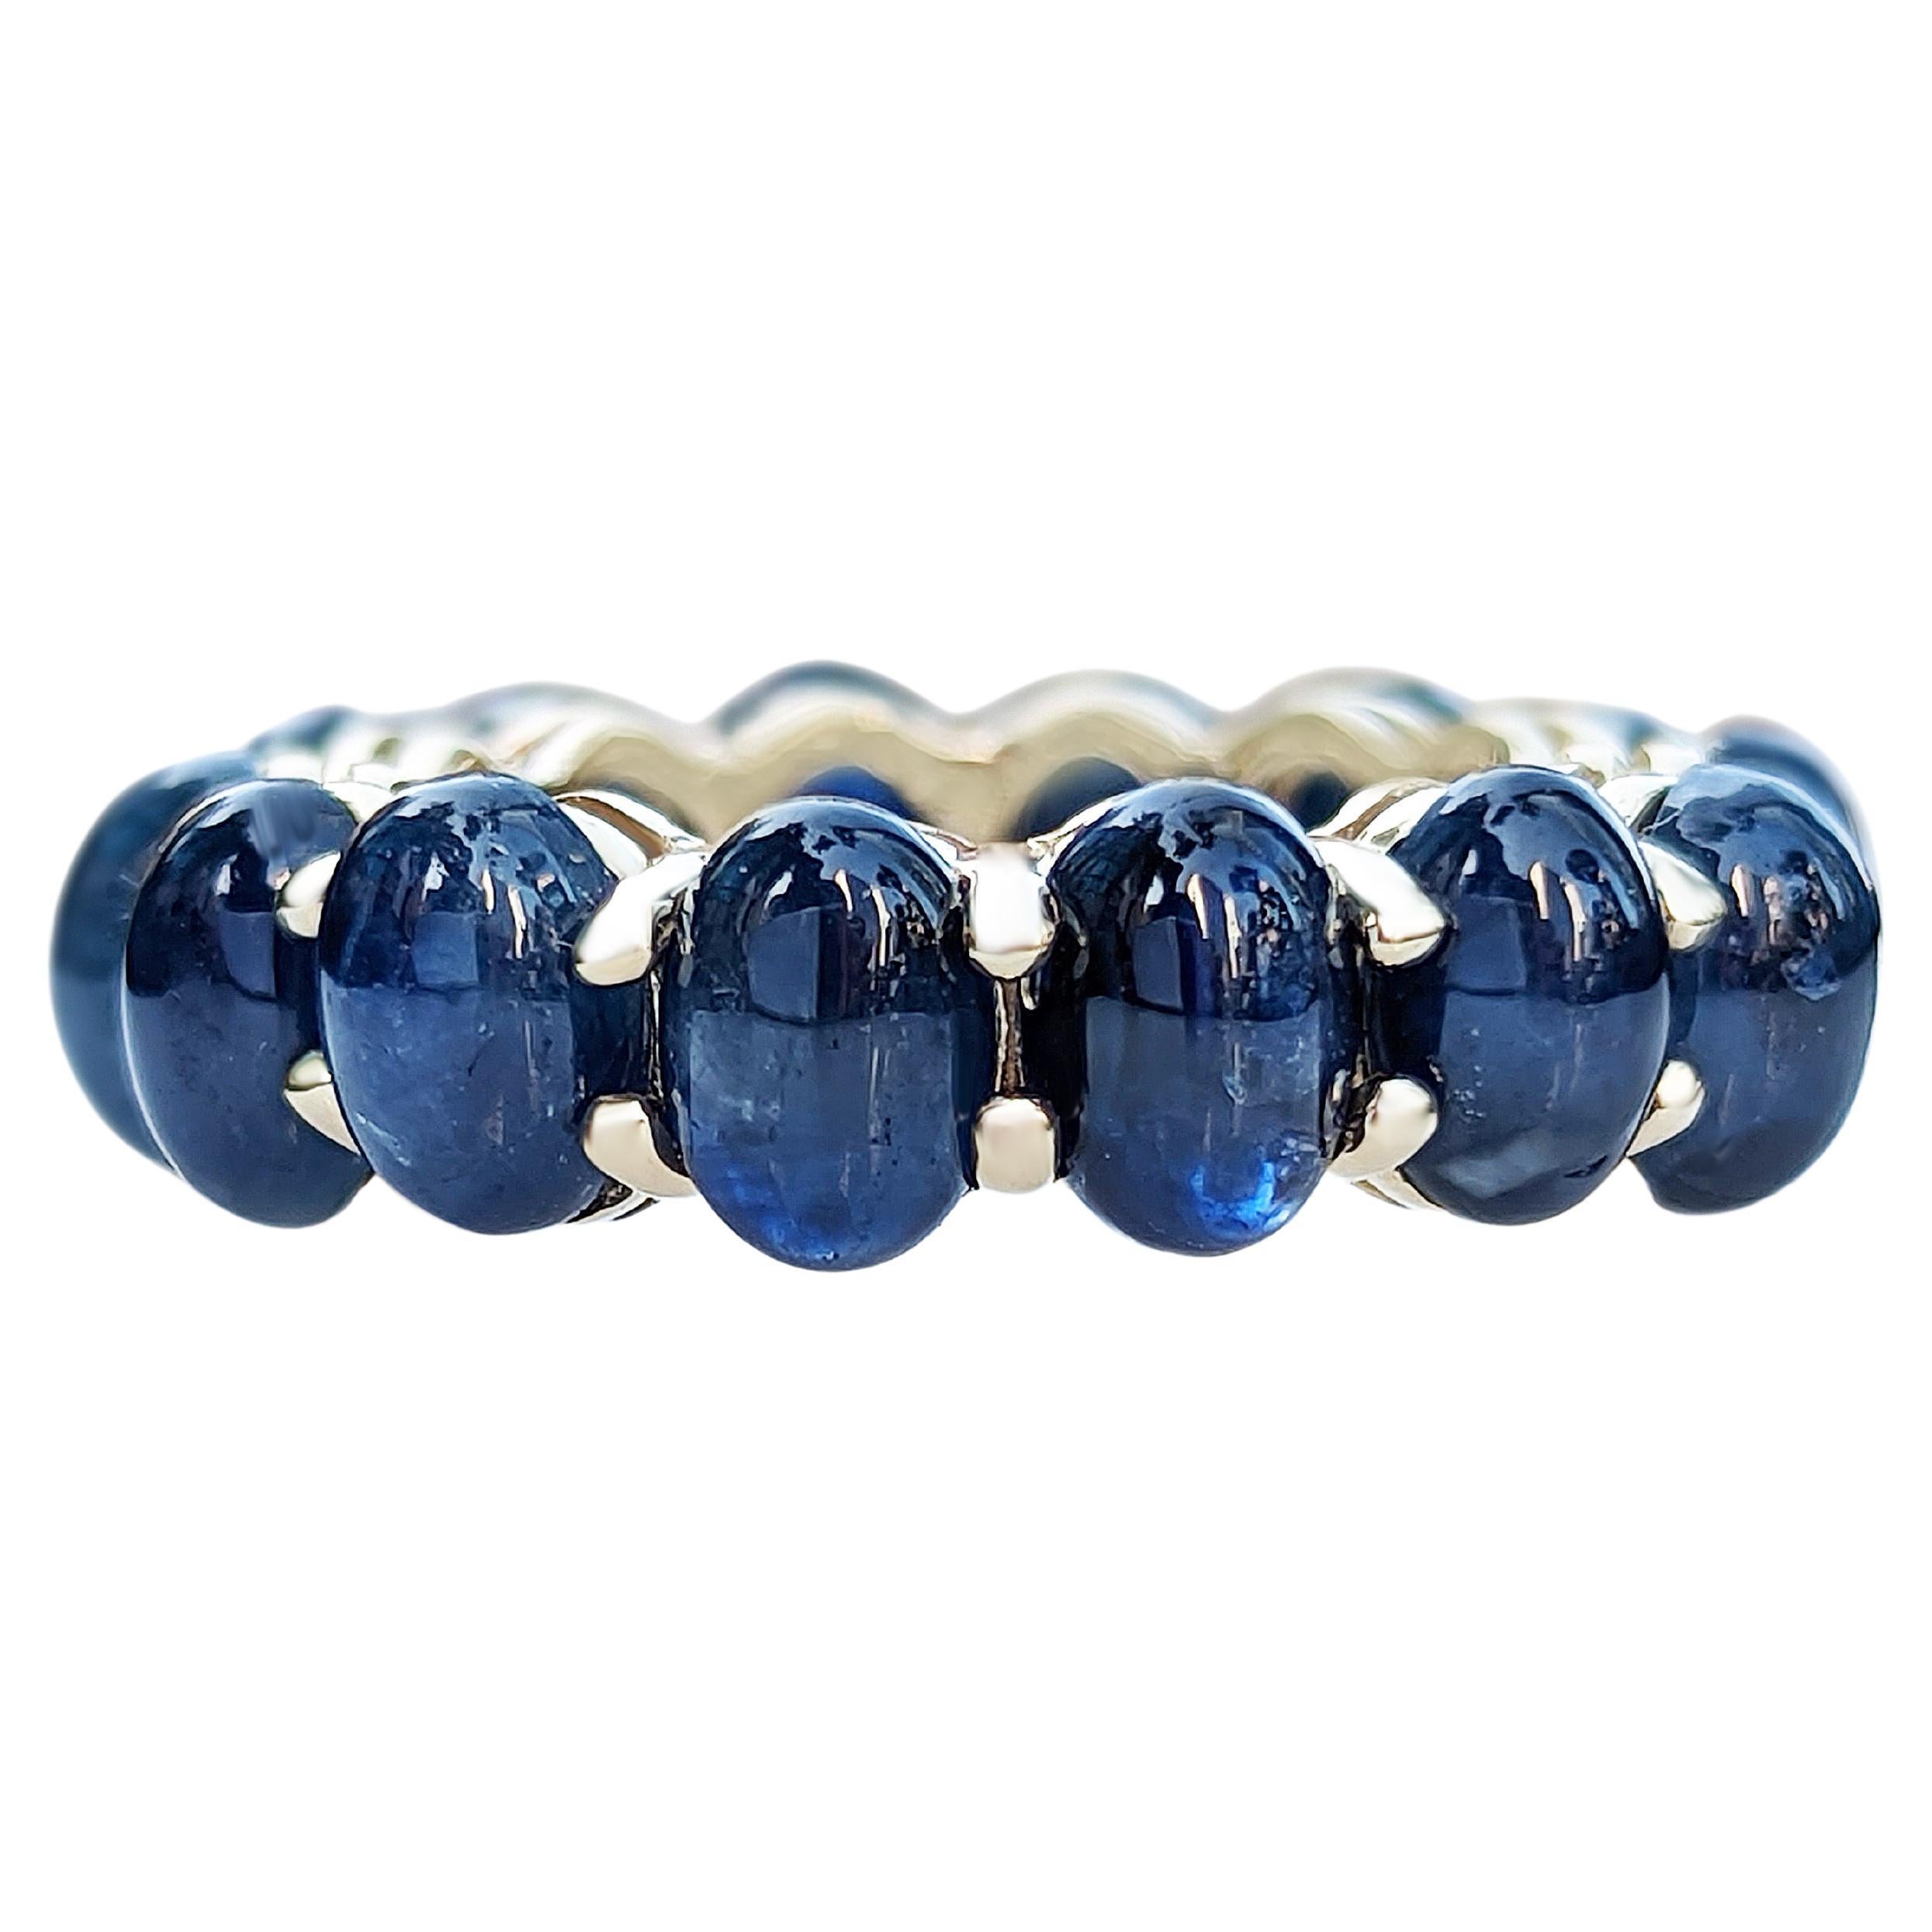 This ring is definitely a show stopper and will draw attention wherever you go! A great gift for yourself or your loved one - a heirloom piece to treasure forever!

Center Natural Sapphire:
Weight: 19.11 ct, 14 stones
Colour: Blue
Shape: Oval